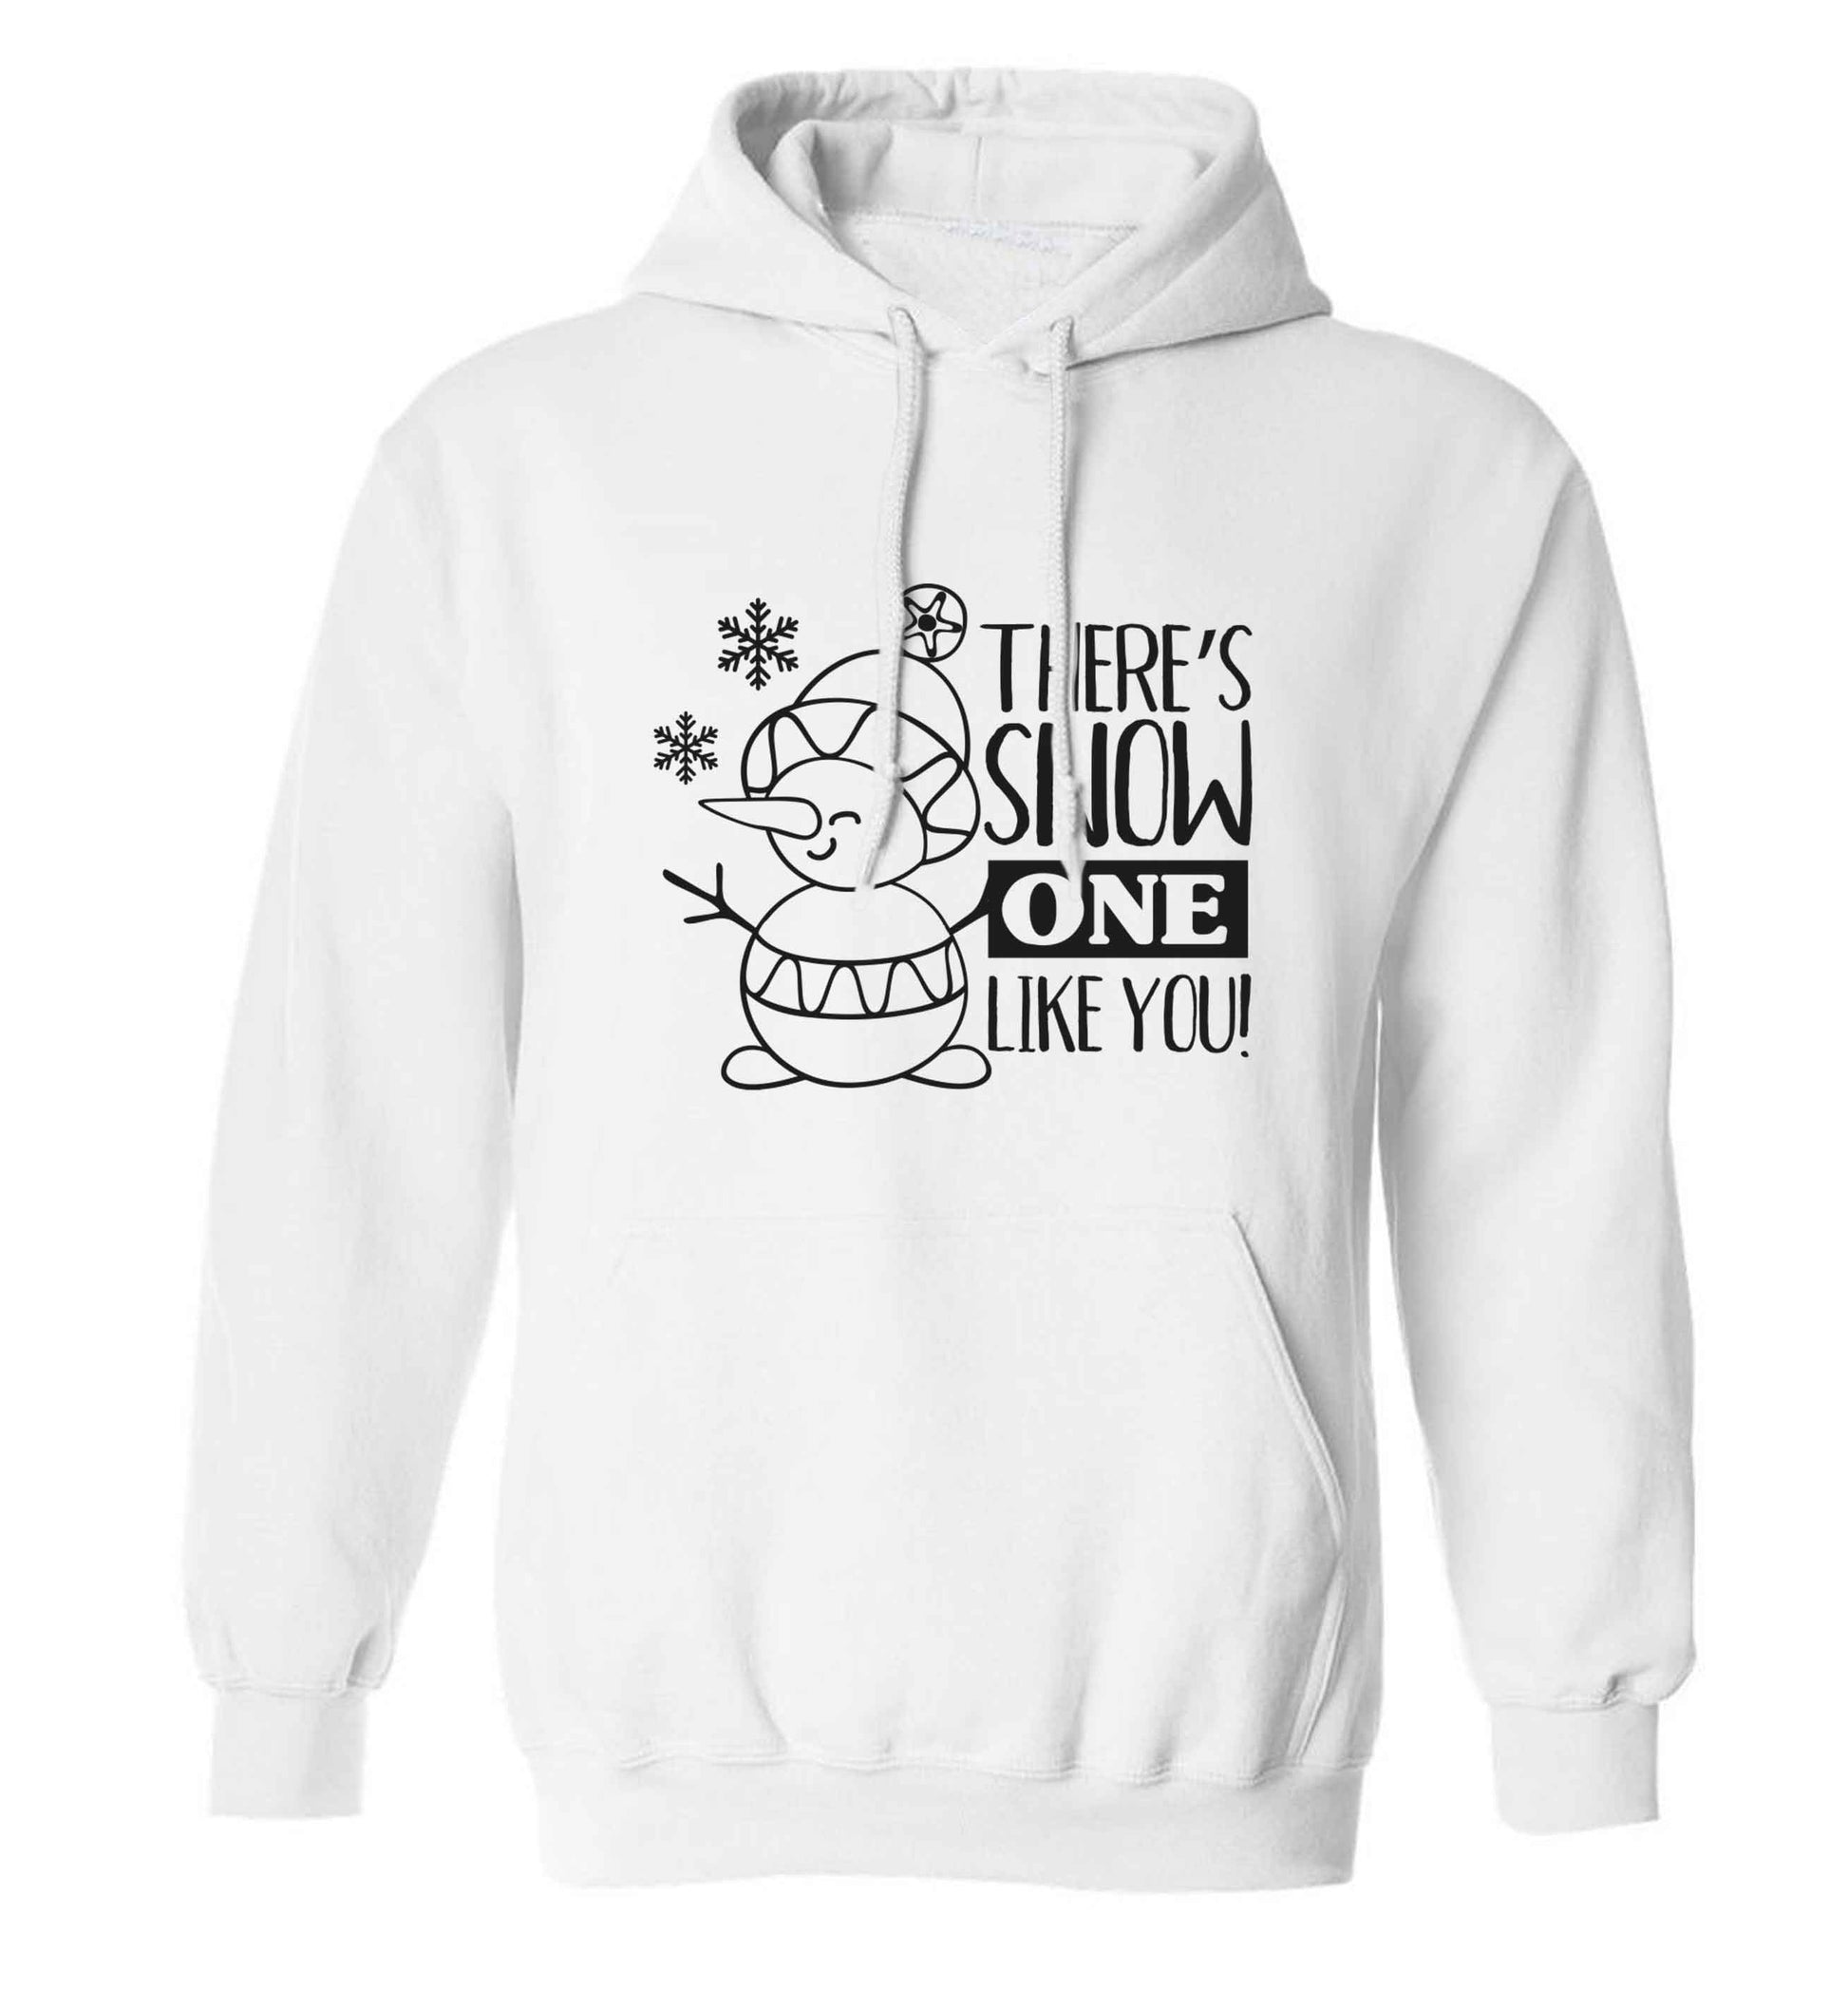 There's snow one like you adults unisex white hoodie 2XL